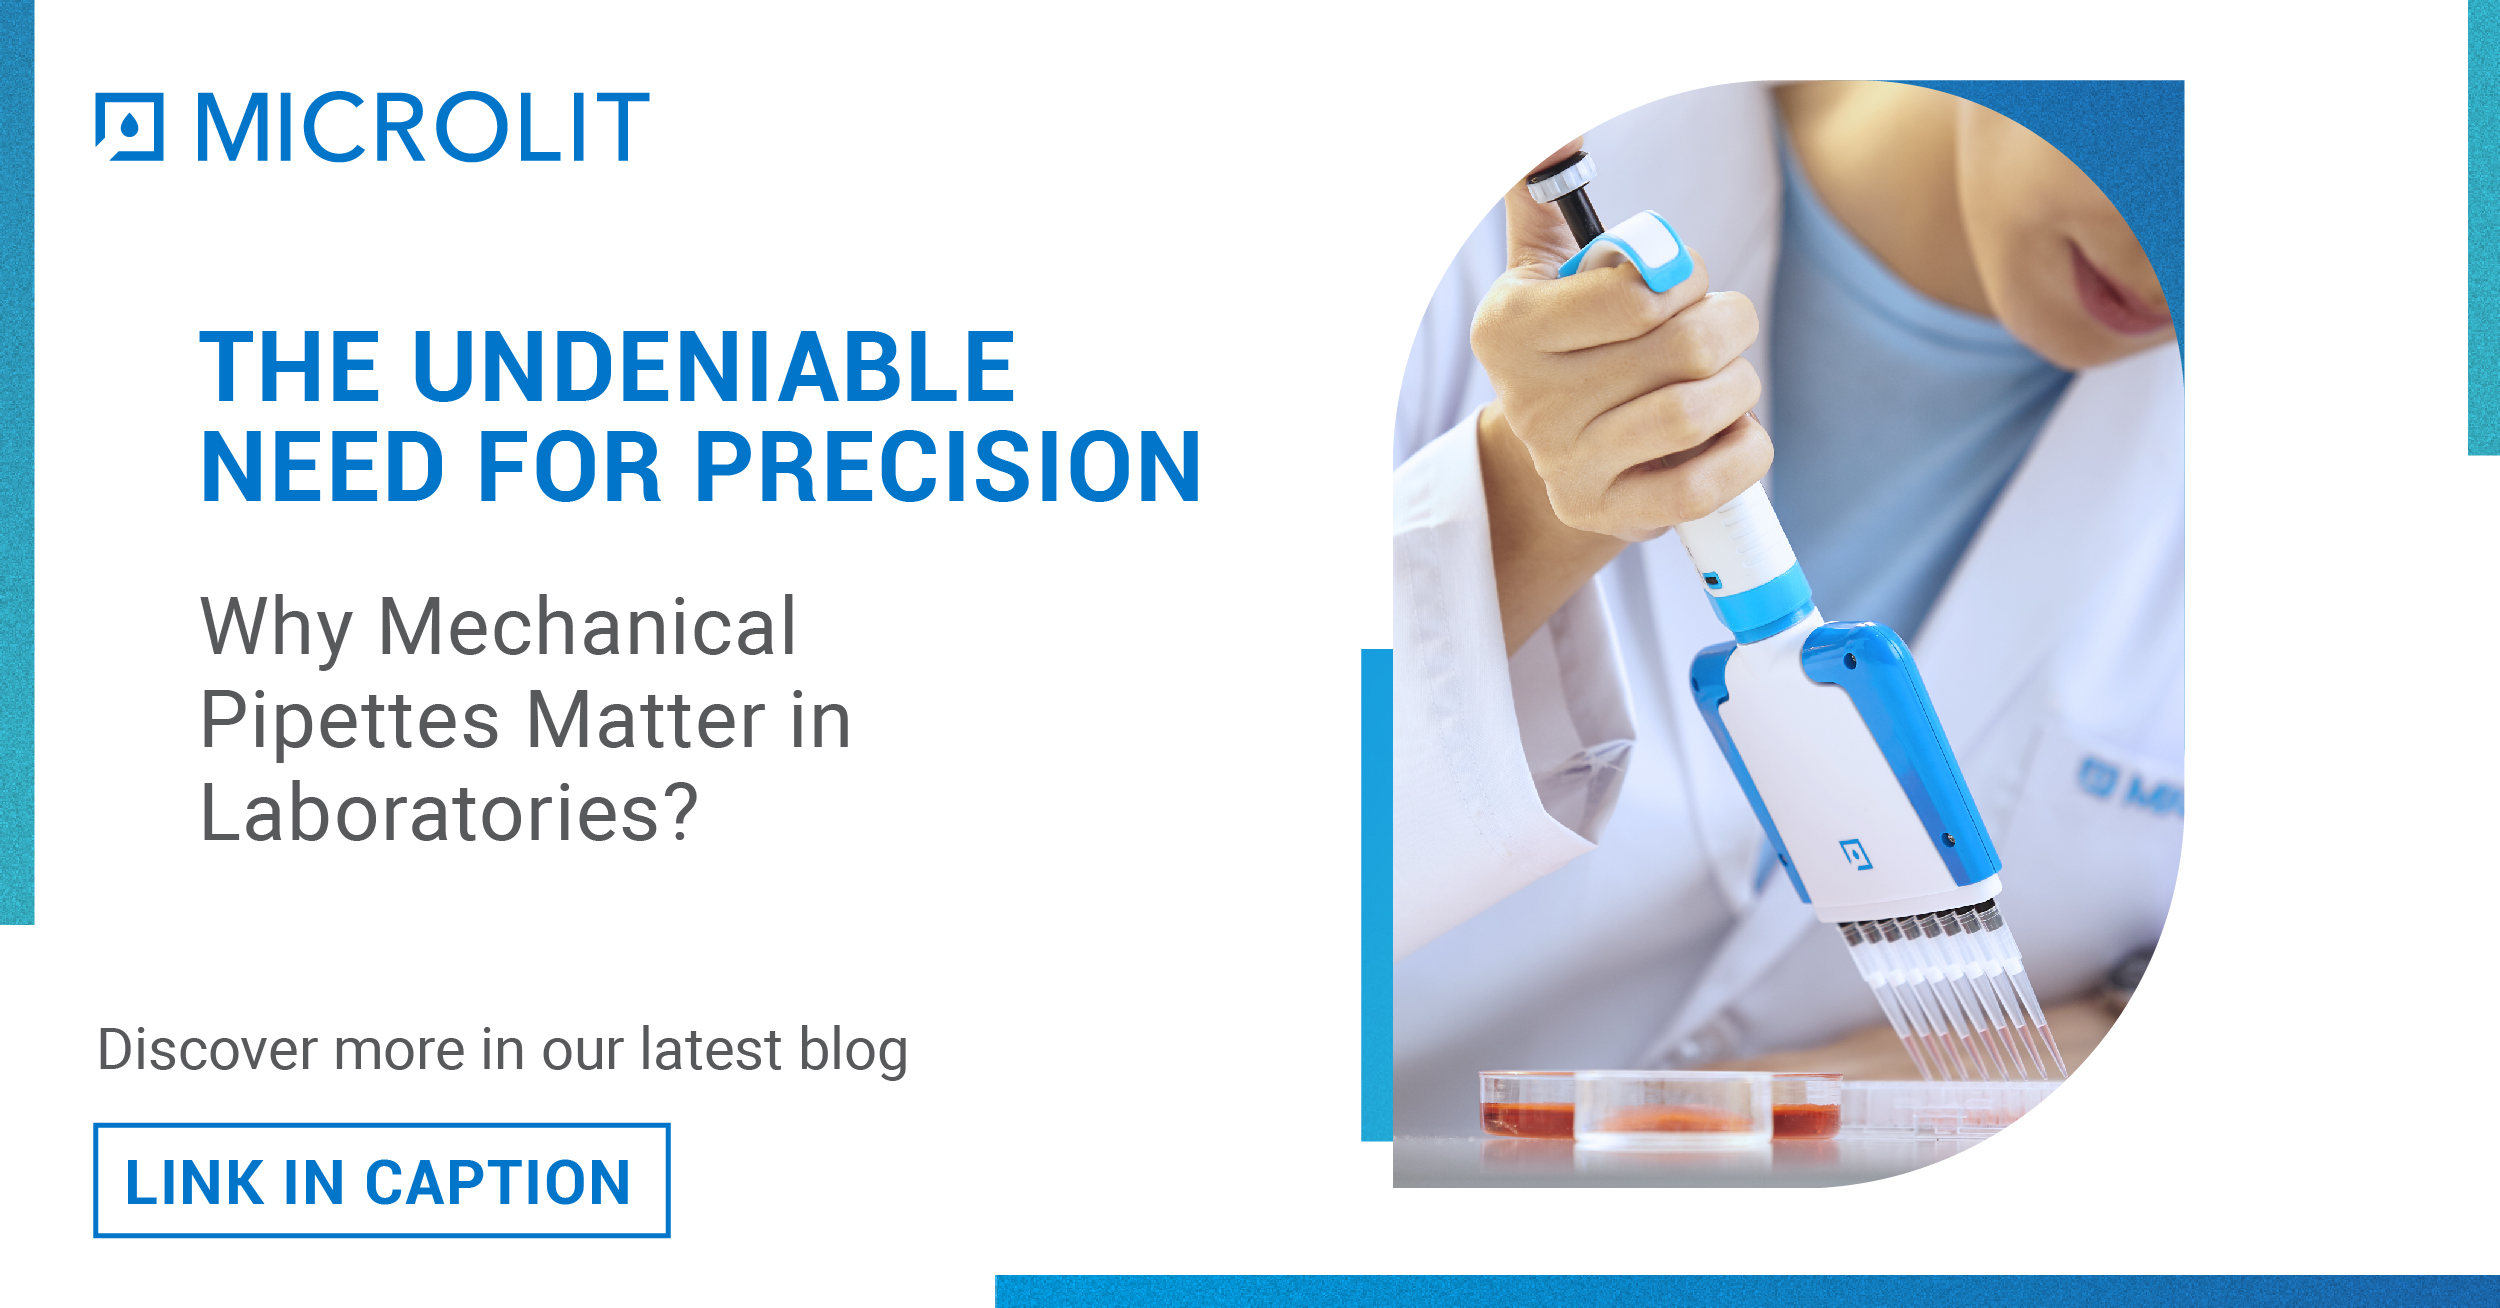 The Undeniable Need for Precision: Why Mechanical Pipettes Matter in Laboratories?